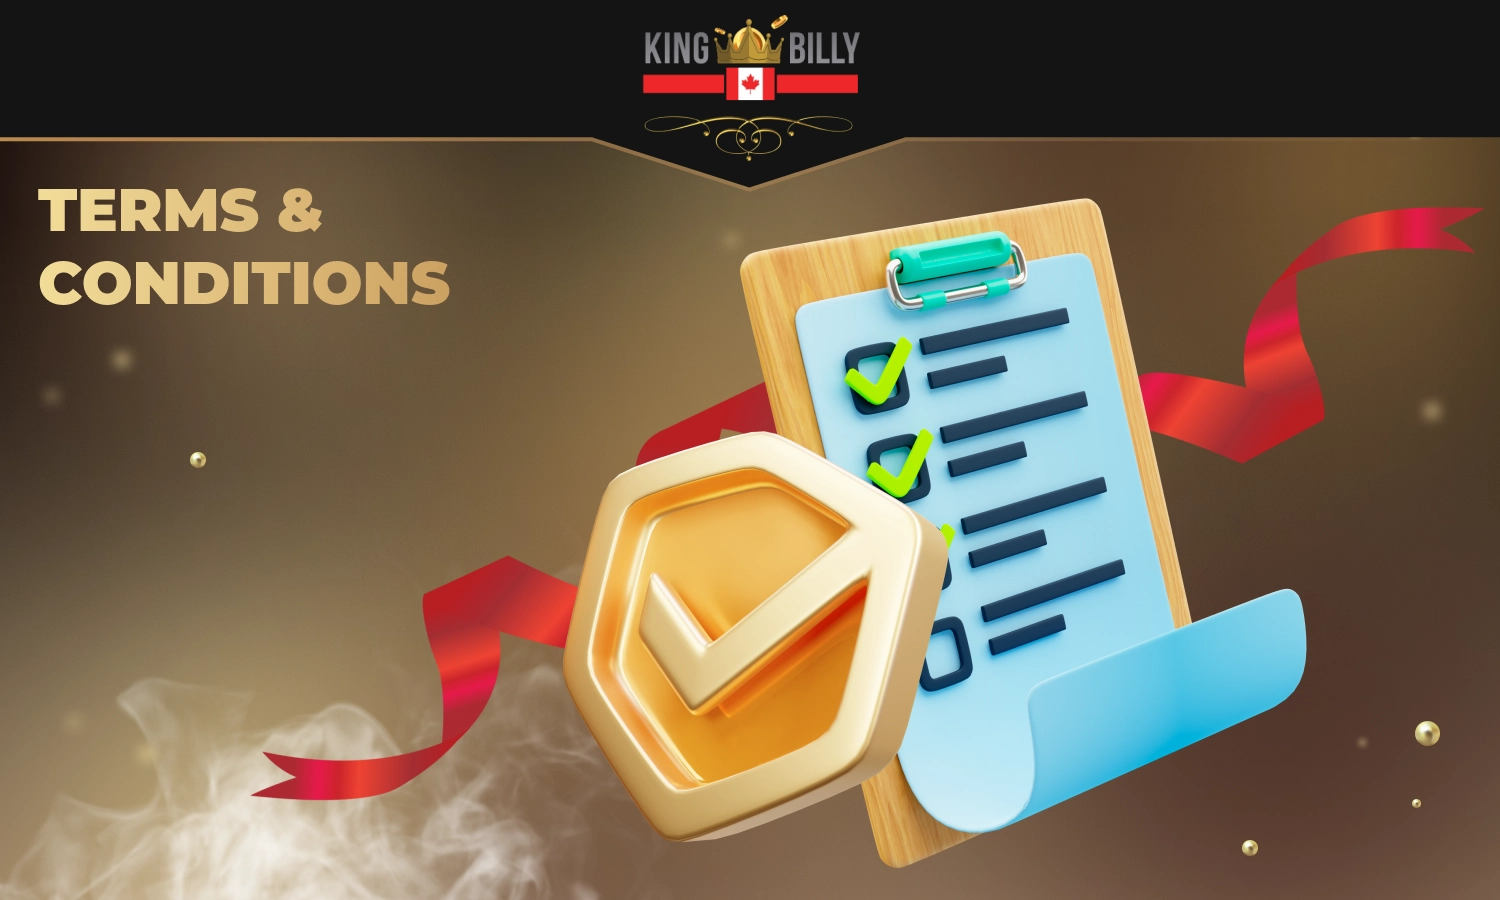 Casino King Billy has basic rules that determine the relationship between the company and the site, as well as how Canadian players should use the site for a comfortable game